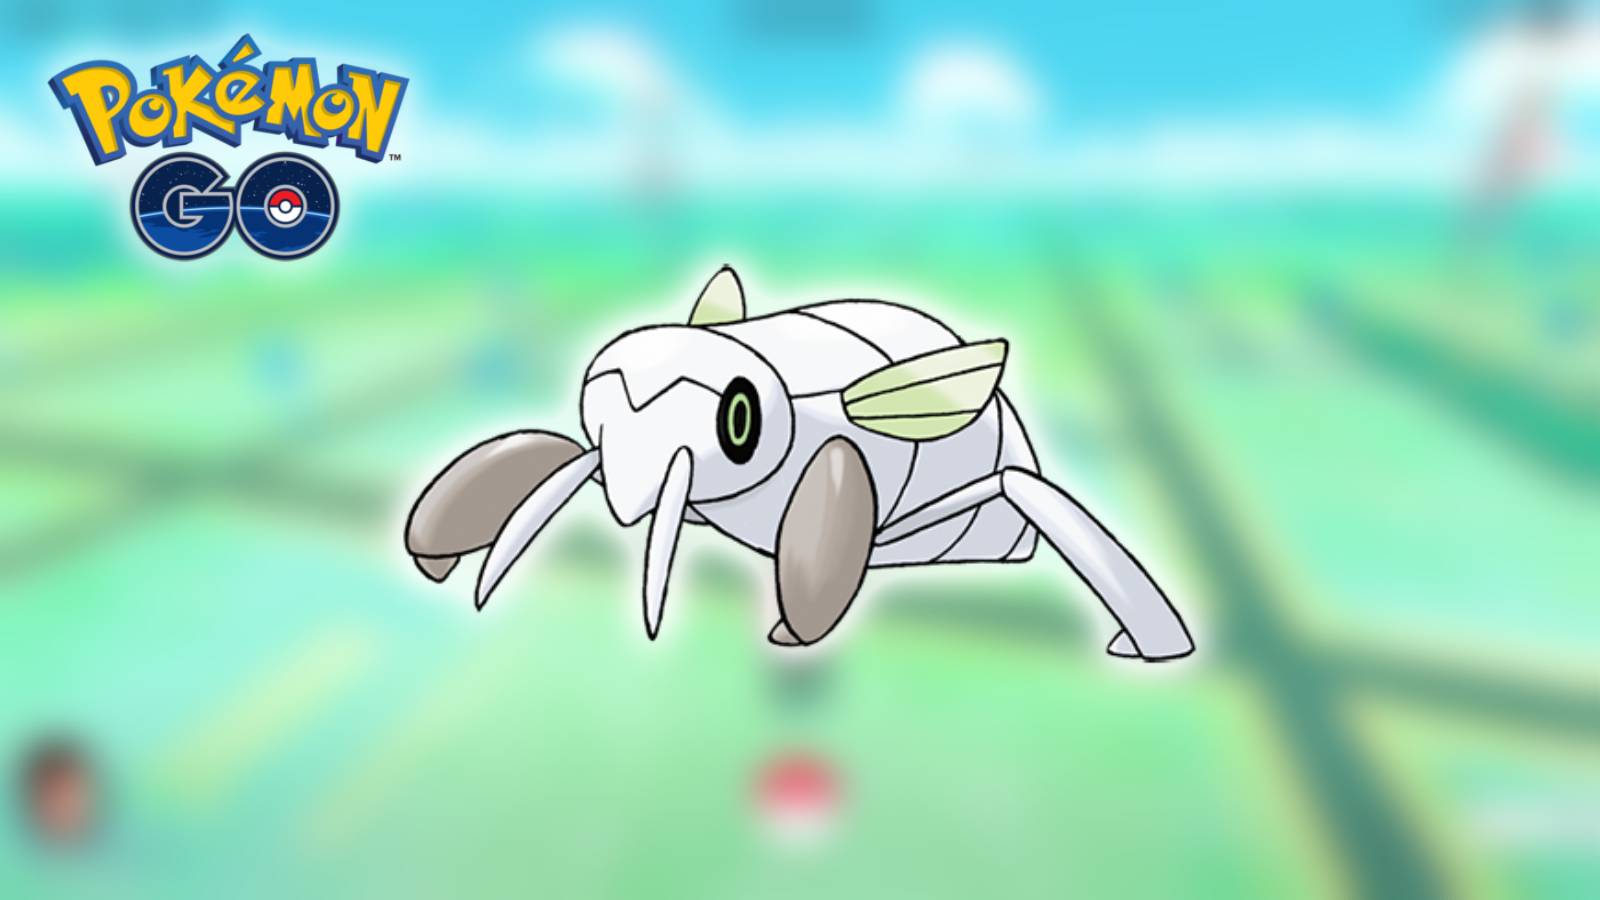 The Pokemon Ninxcada appears against a blurred background